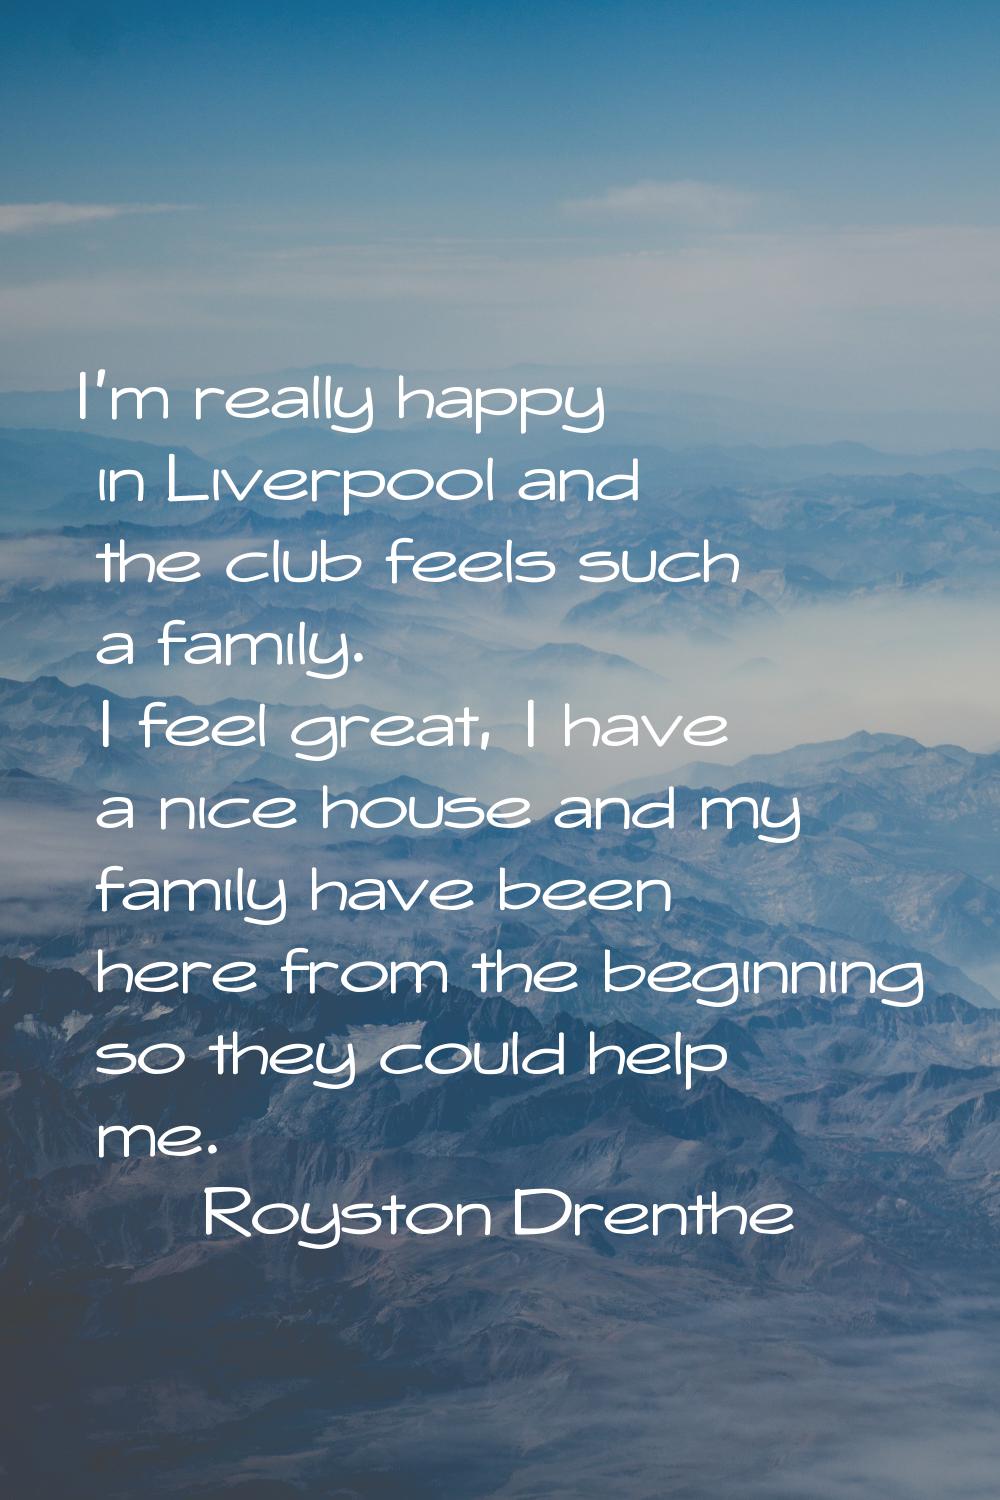 I'm really happy in Liverpool and the club feels such a family. I feel great, I have a nice house a